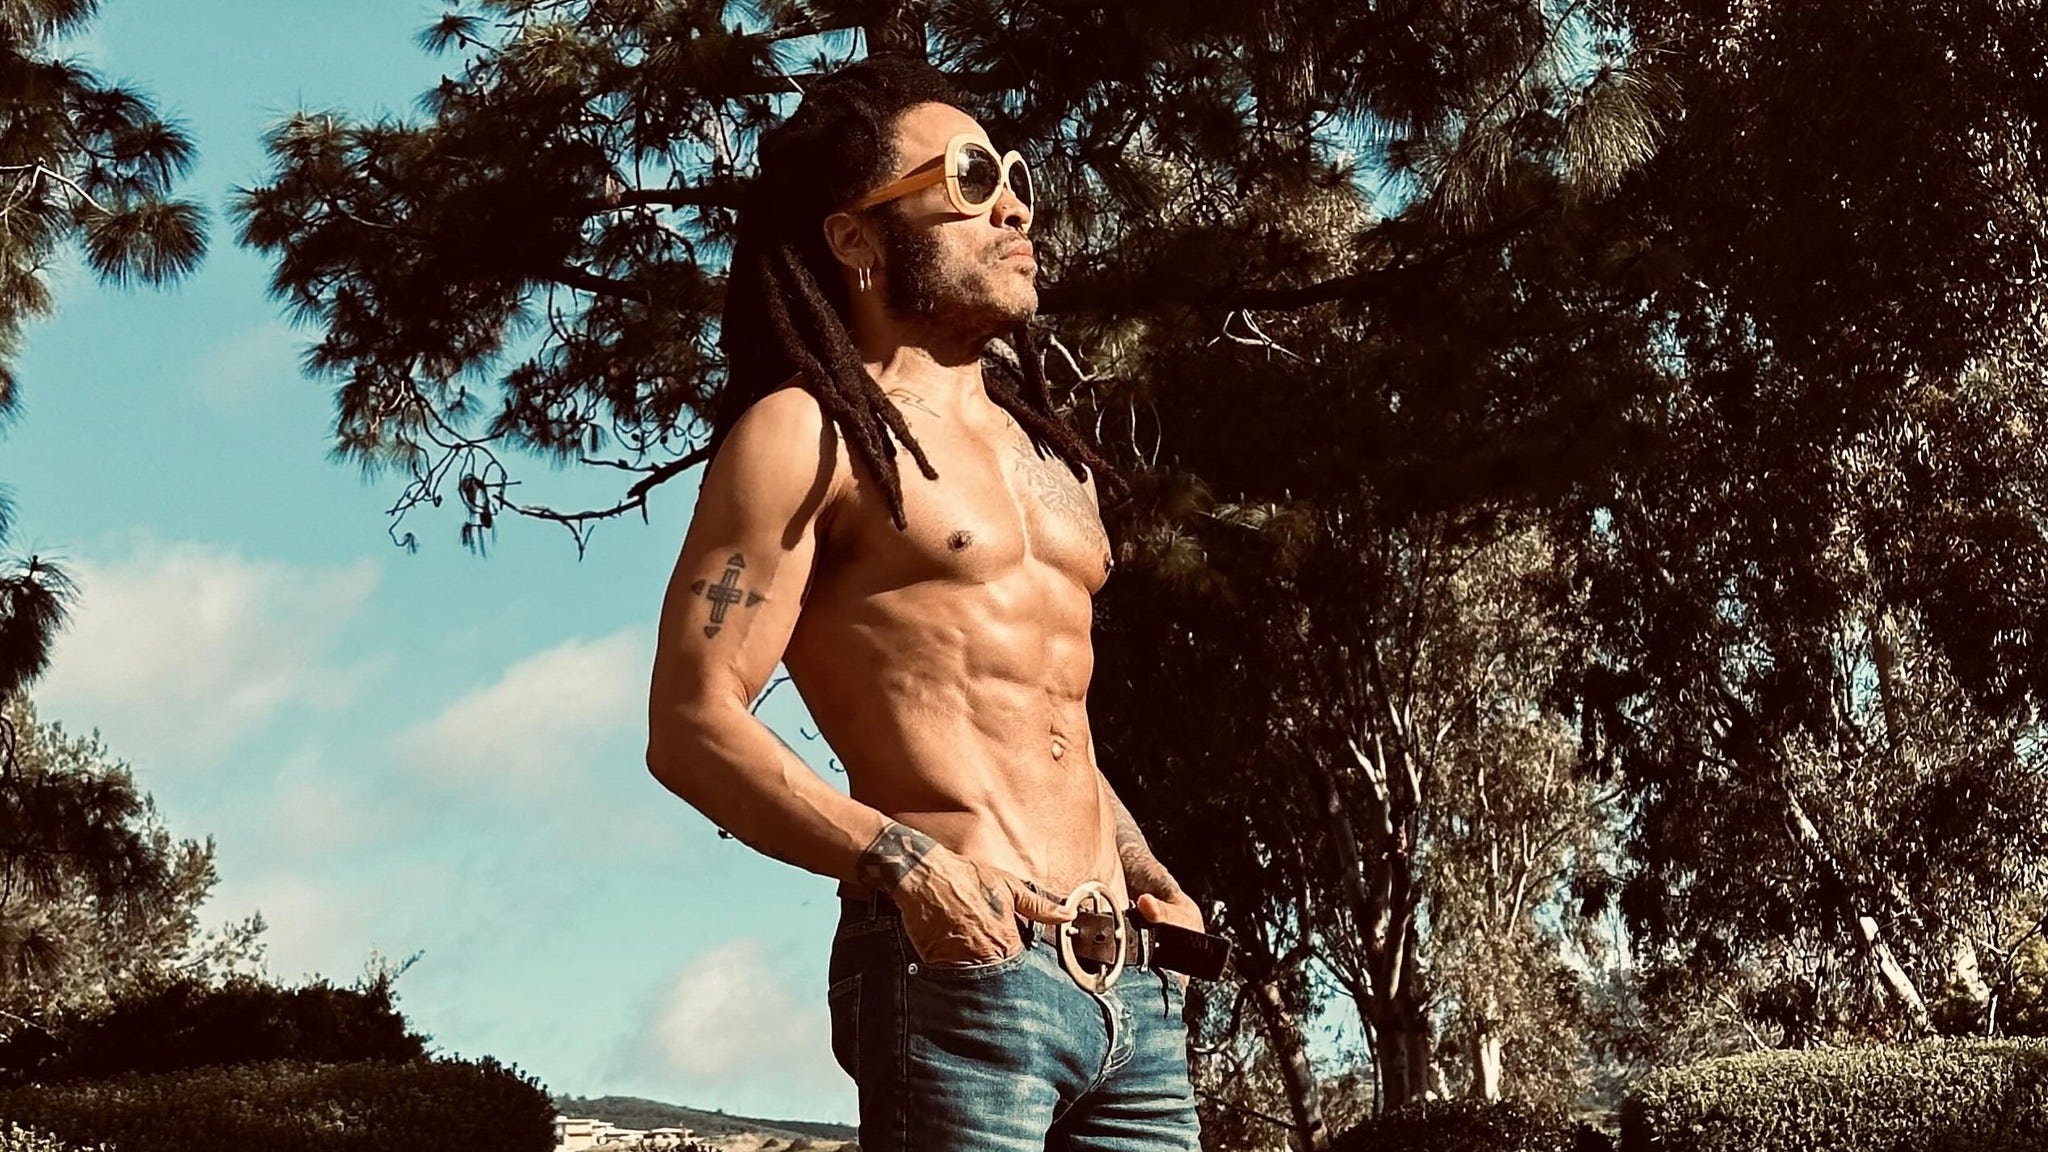 Channing Tatum Shares Hilarious Comment on Future Father-in-Law Lenny Kravitz's Shirtless Photo